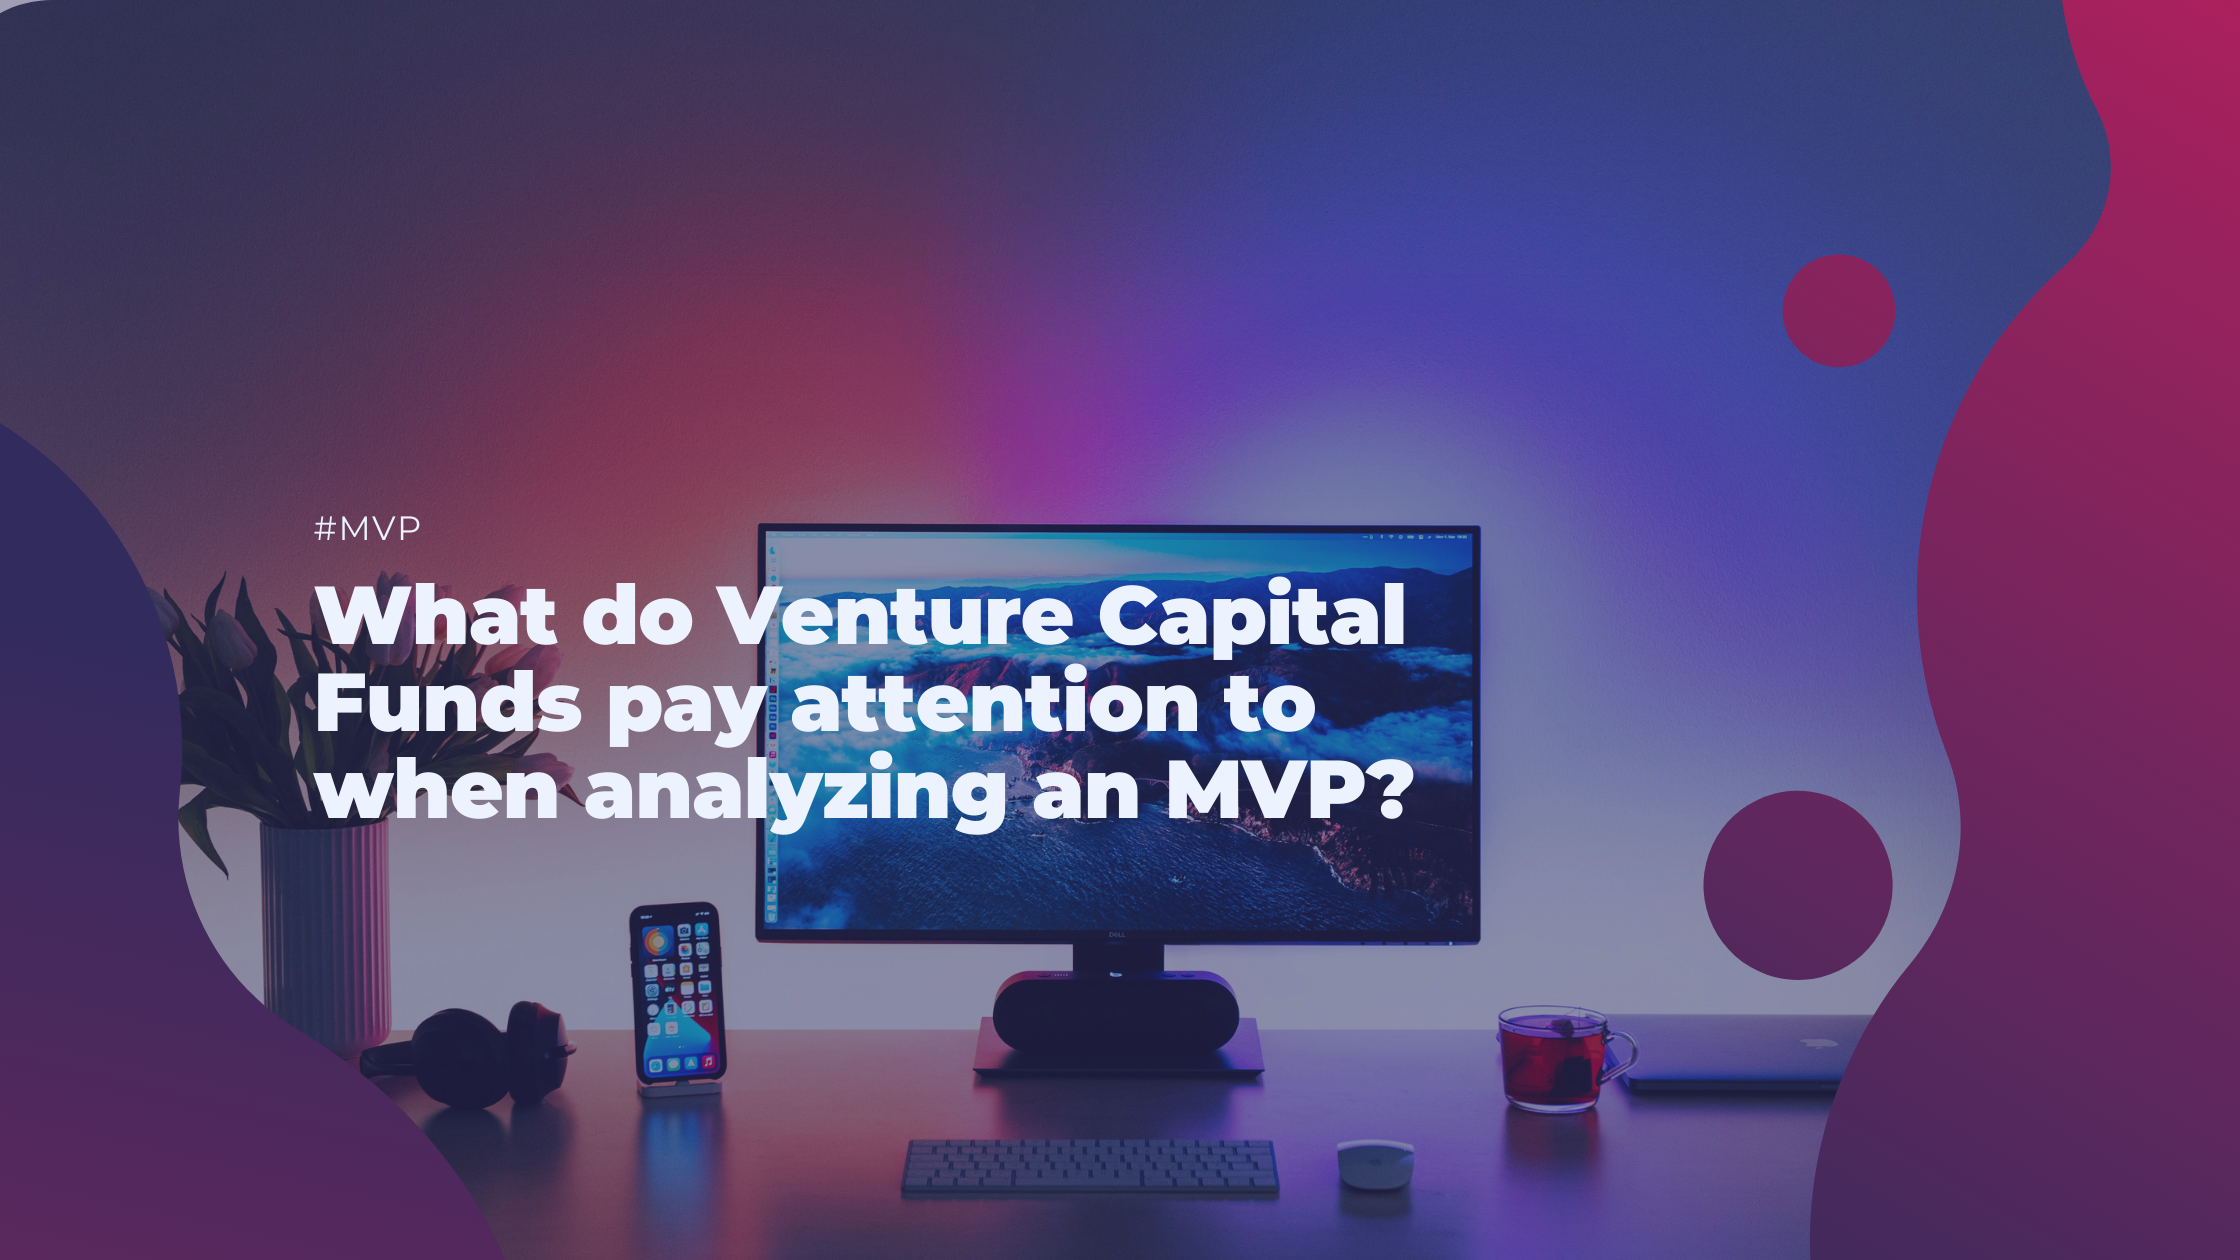 What do Venture Capital Funds pay attention to when analyzing an MVP?